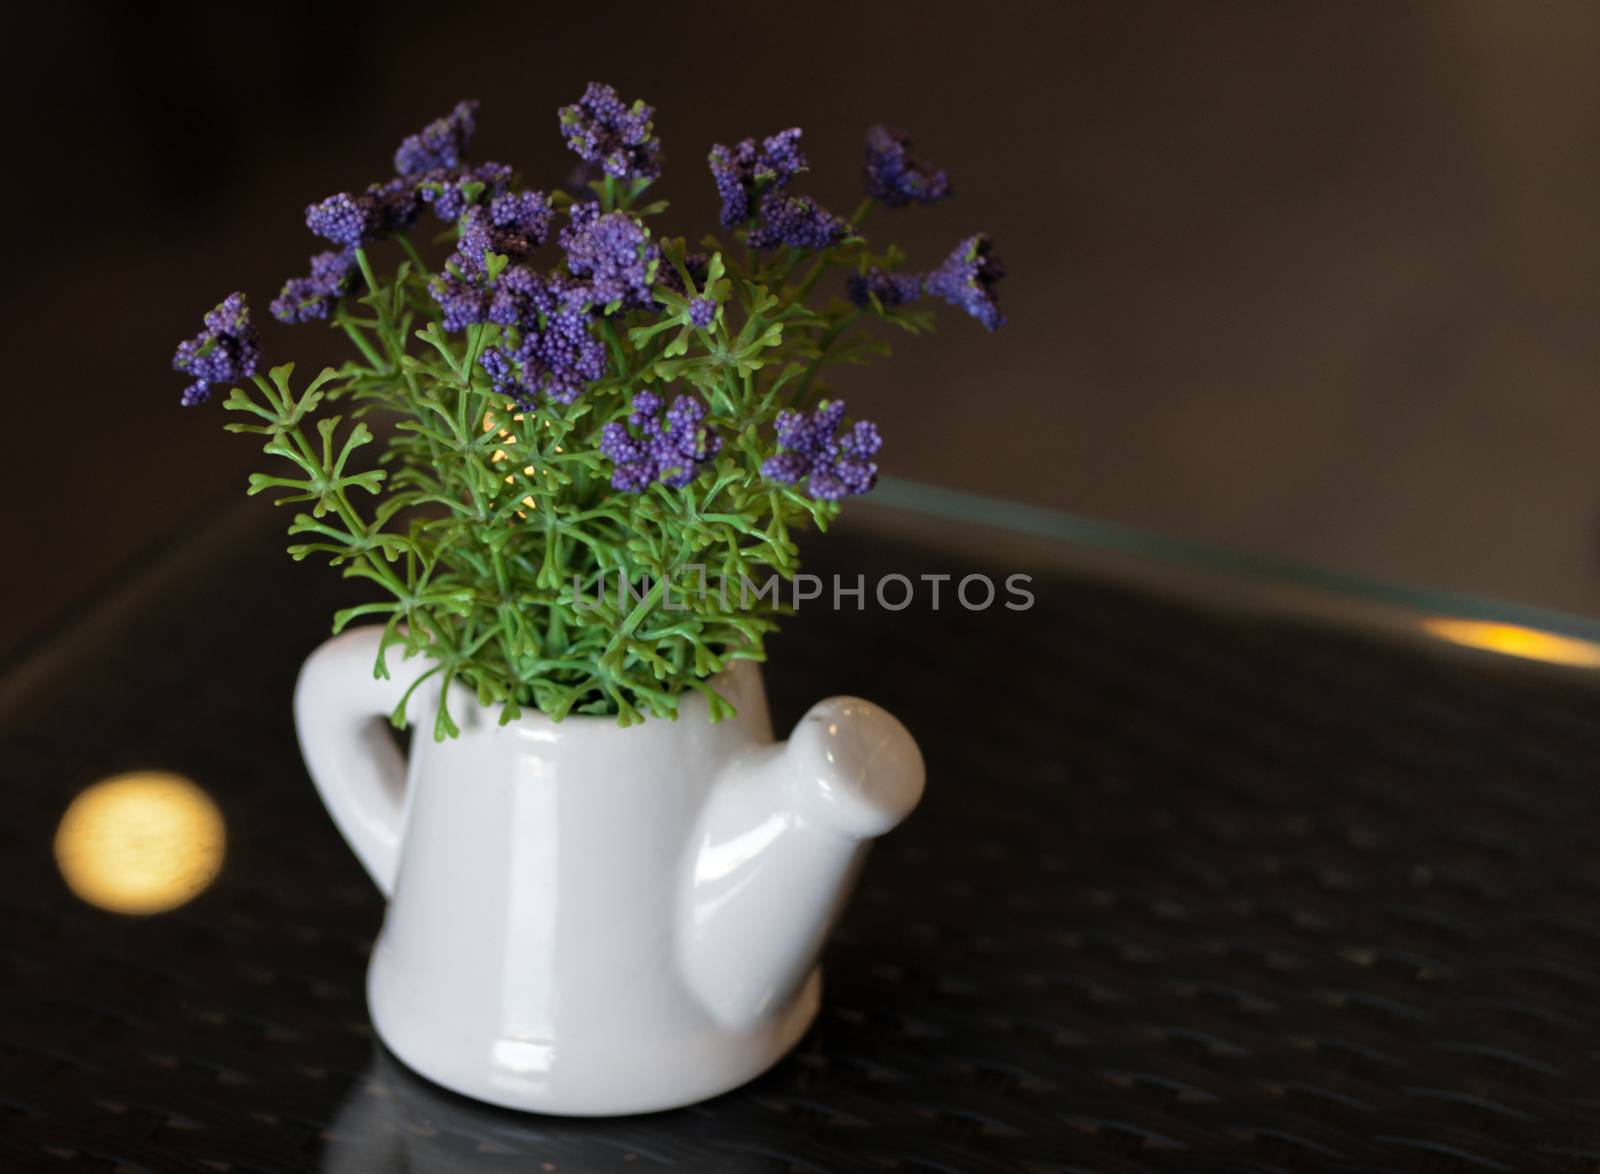 COLOR PHOTO OF SMALL PLANT POTTED IN WATERING POT ON TABLETOP